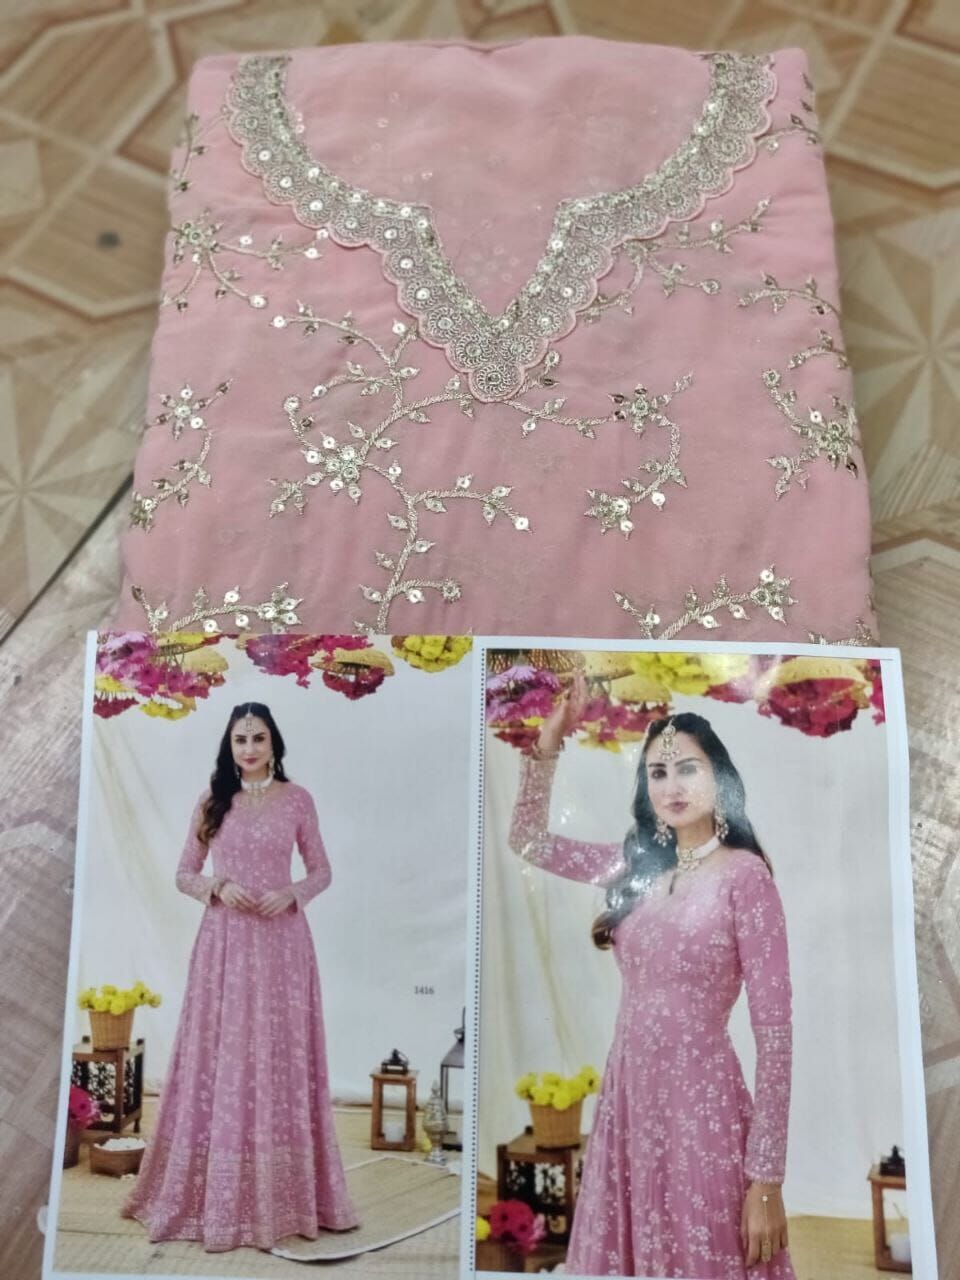 Baby Pink Heavy Blooming Fox Georgette with Embroidery Anarkali Suit Designer Suits shopindi.sg 